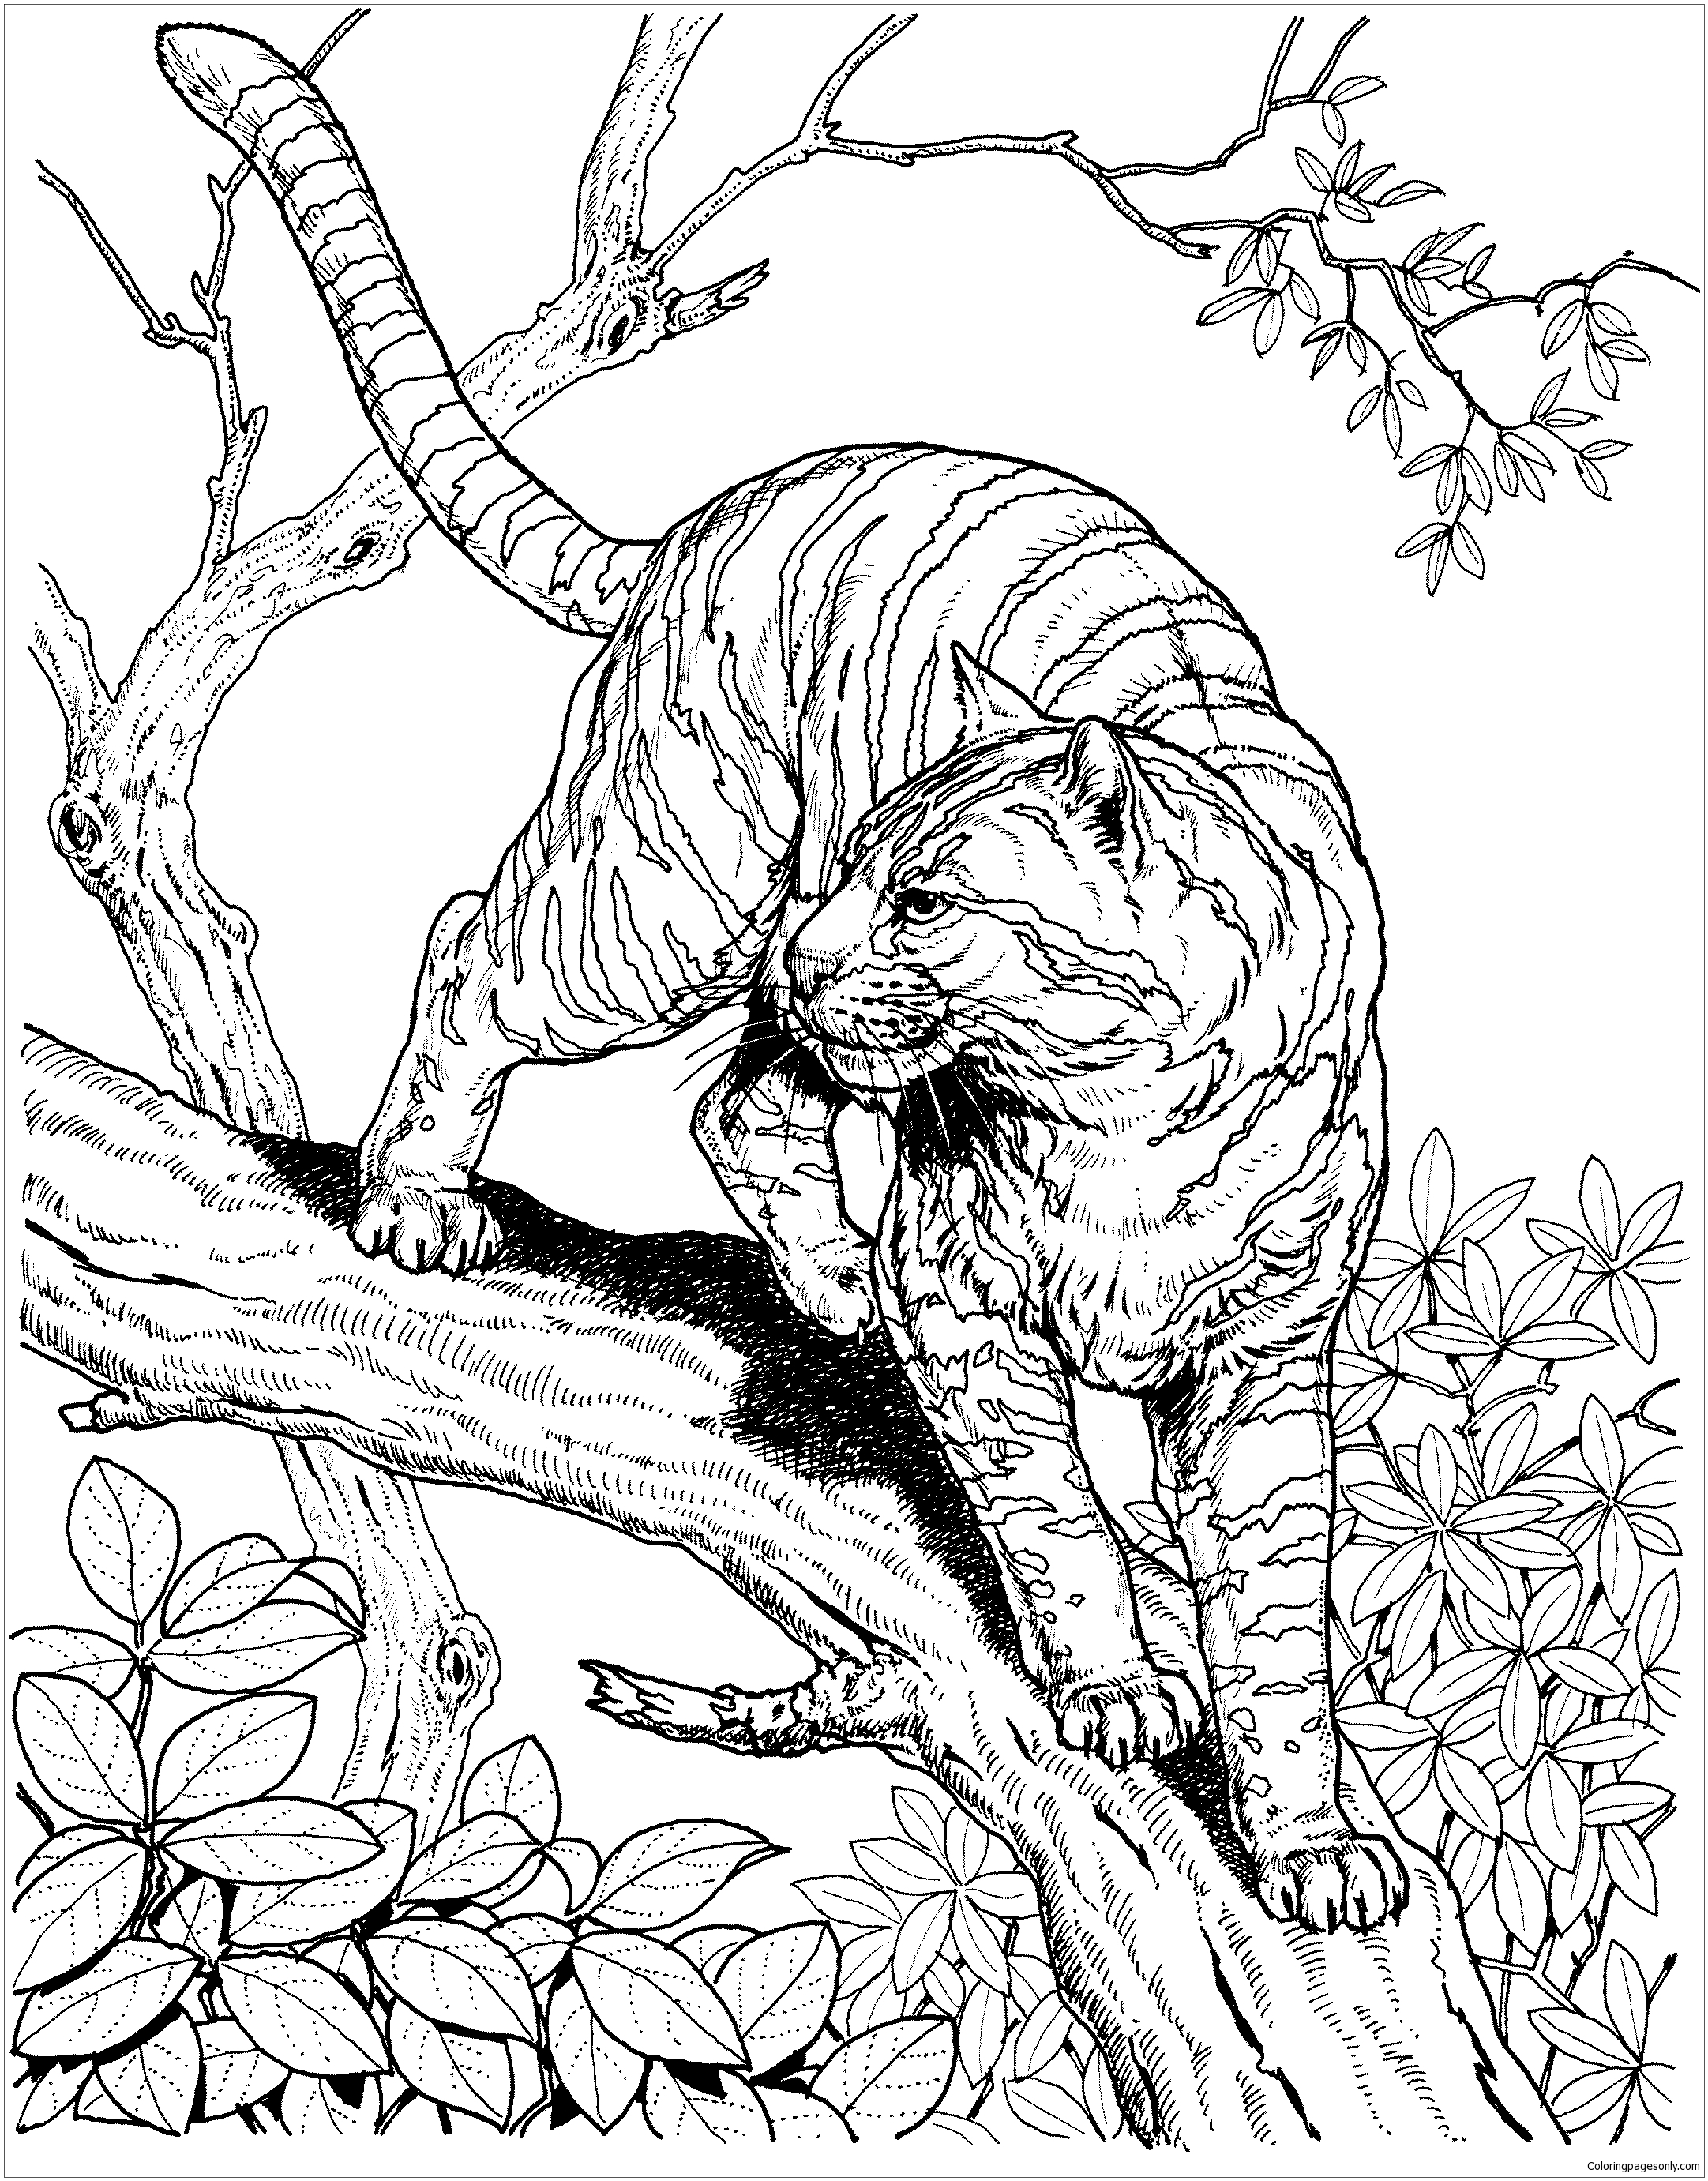 Hard Animal 2 Coloring Pages - Hard Coloring Pages - Coloring Pages For